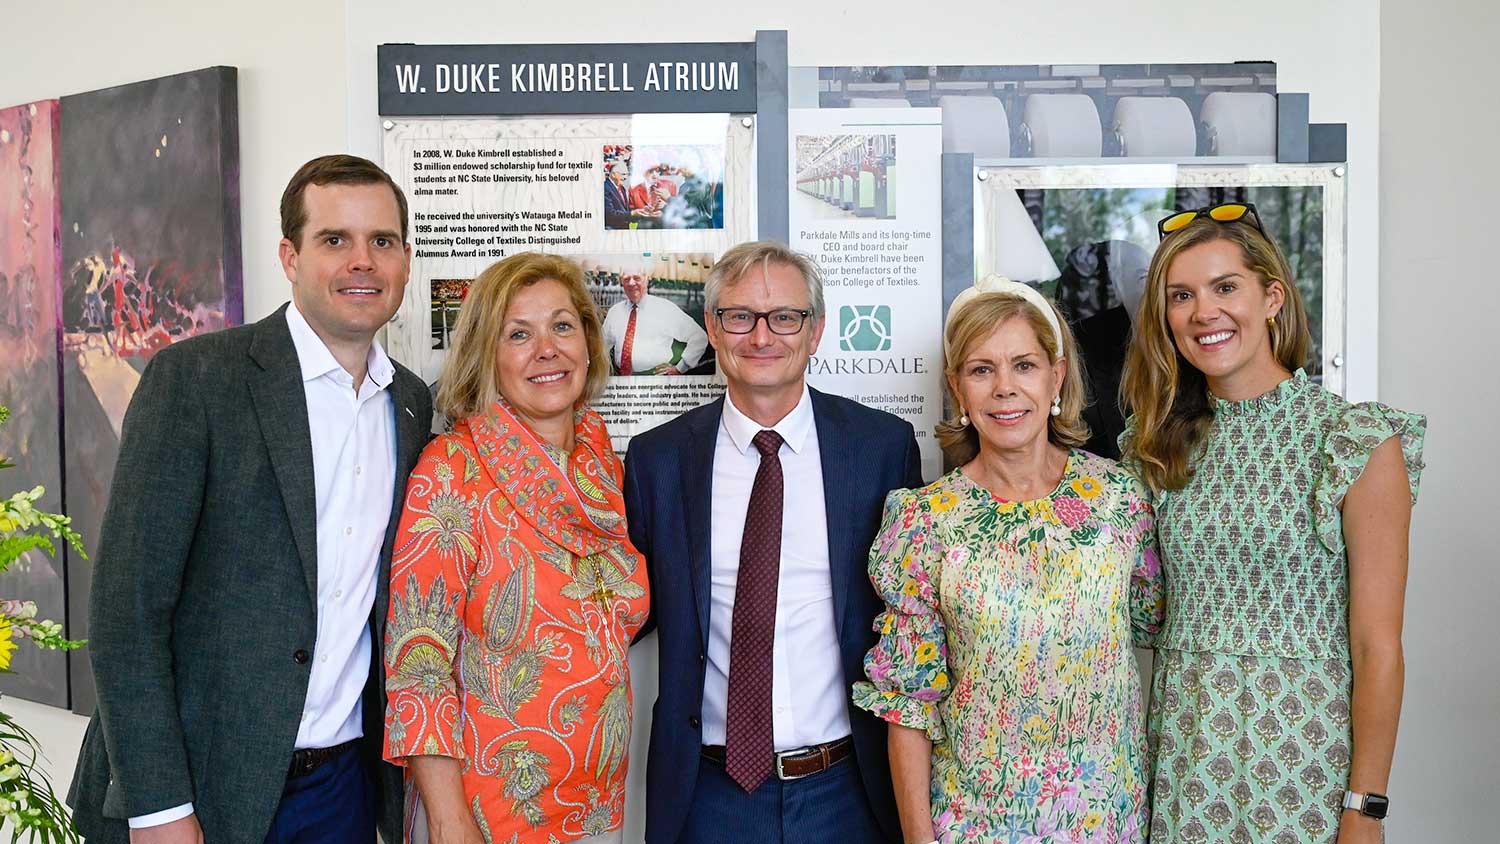 A memorial display was unveiled to honor distinguished alumnus W. Duke Kimbrell ’49 in the college's W. Duke Kimbrell Atrium. In attendance at the unveiling ceremony were Dean David Hinks (center) and Kimbrell's daughters and grandchildren: (l-r) Davis Warlick, Shepard Halsch, Pamela Warlick and Collins Byers.